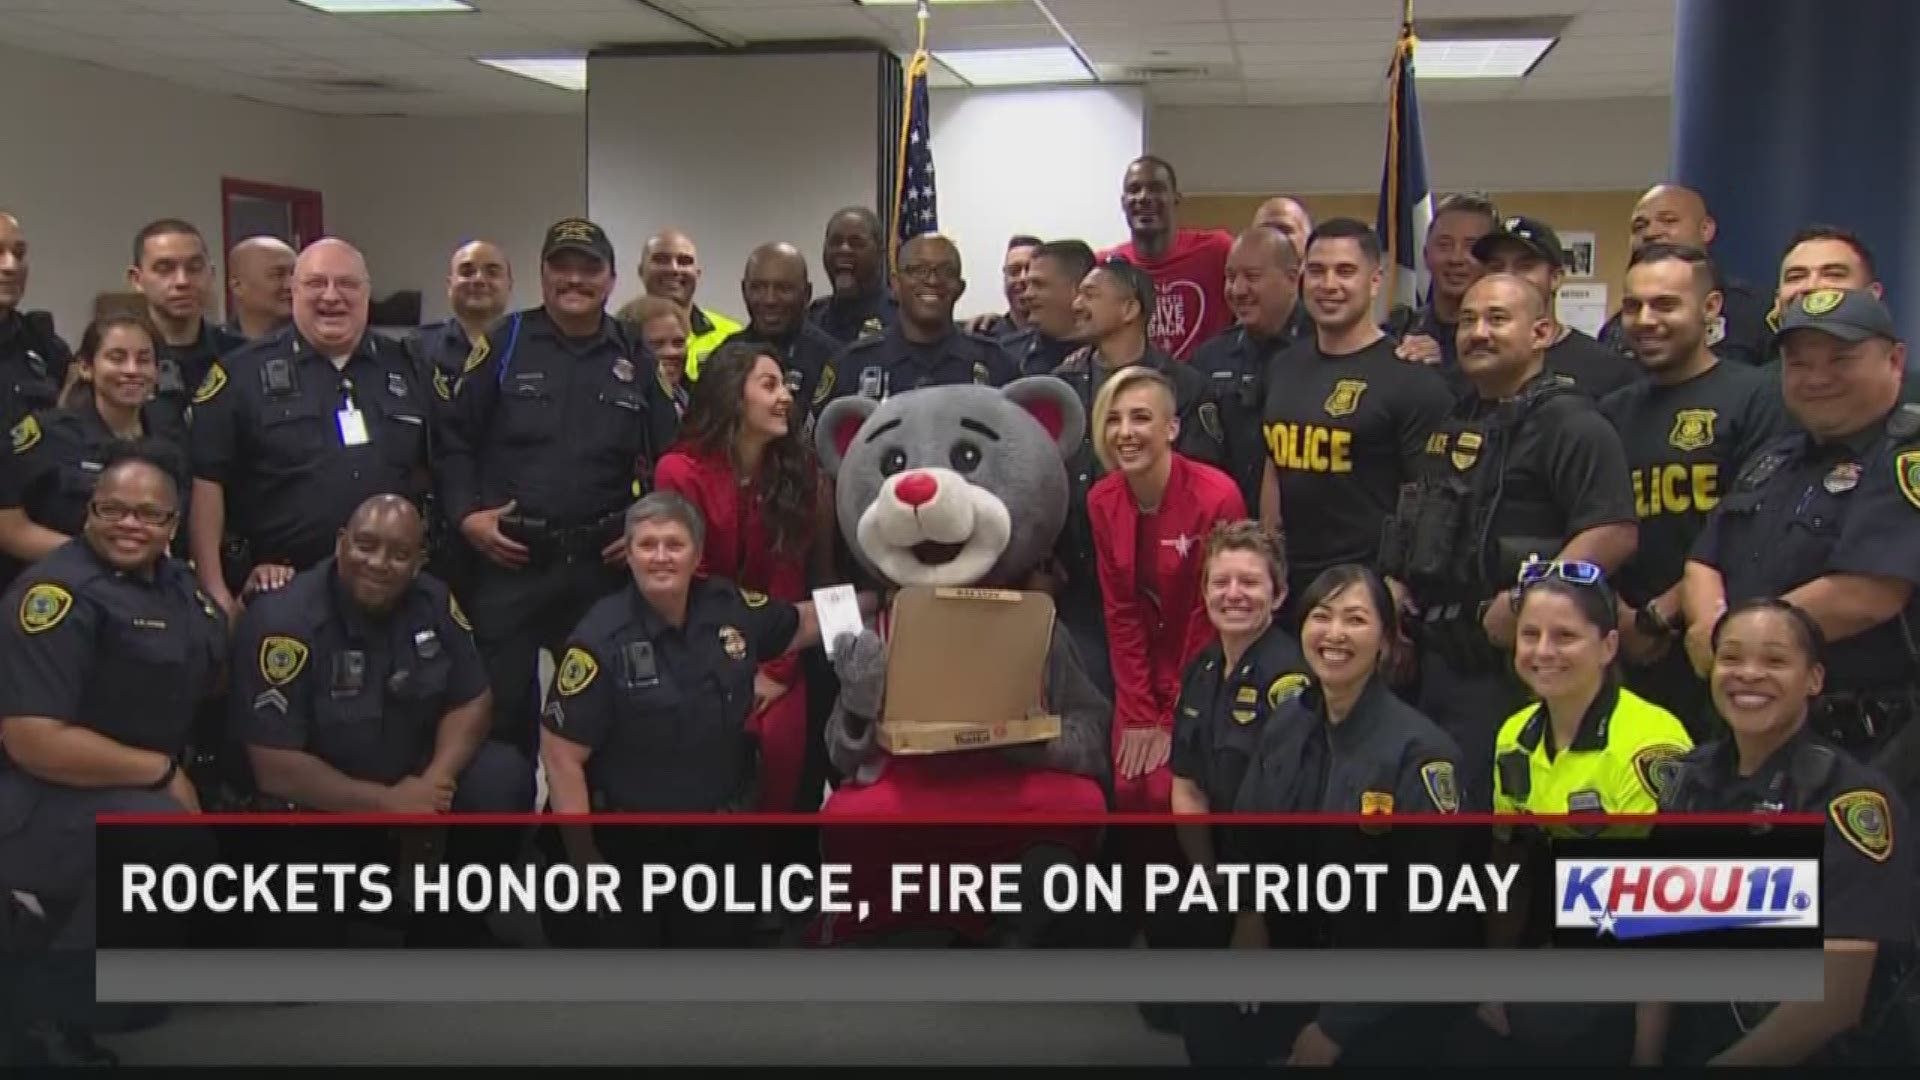 The Houston Rockets honored Houston police on Sept. 11 by delivering pizzas to those departments.